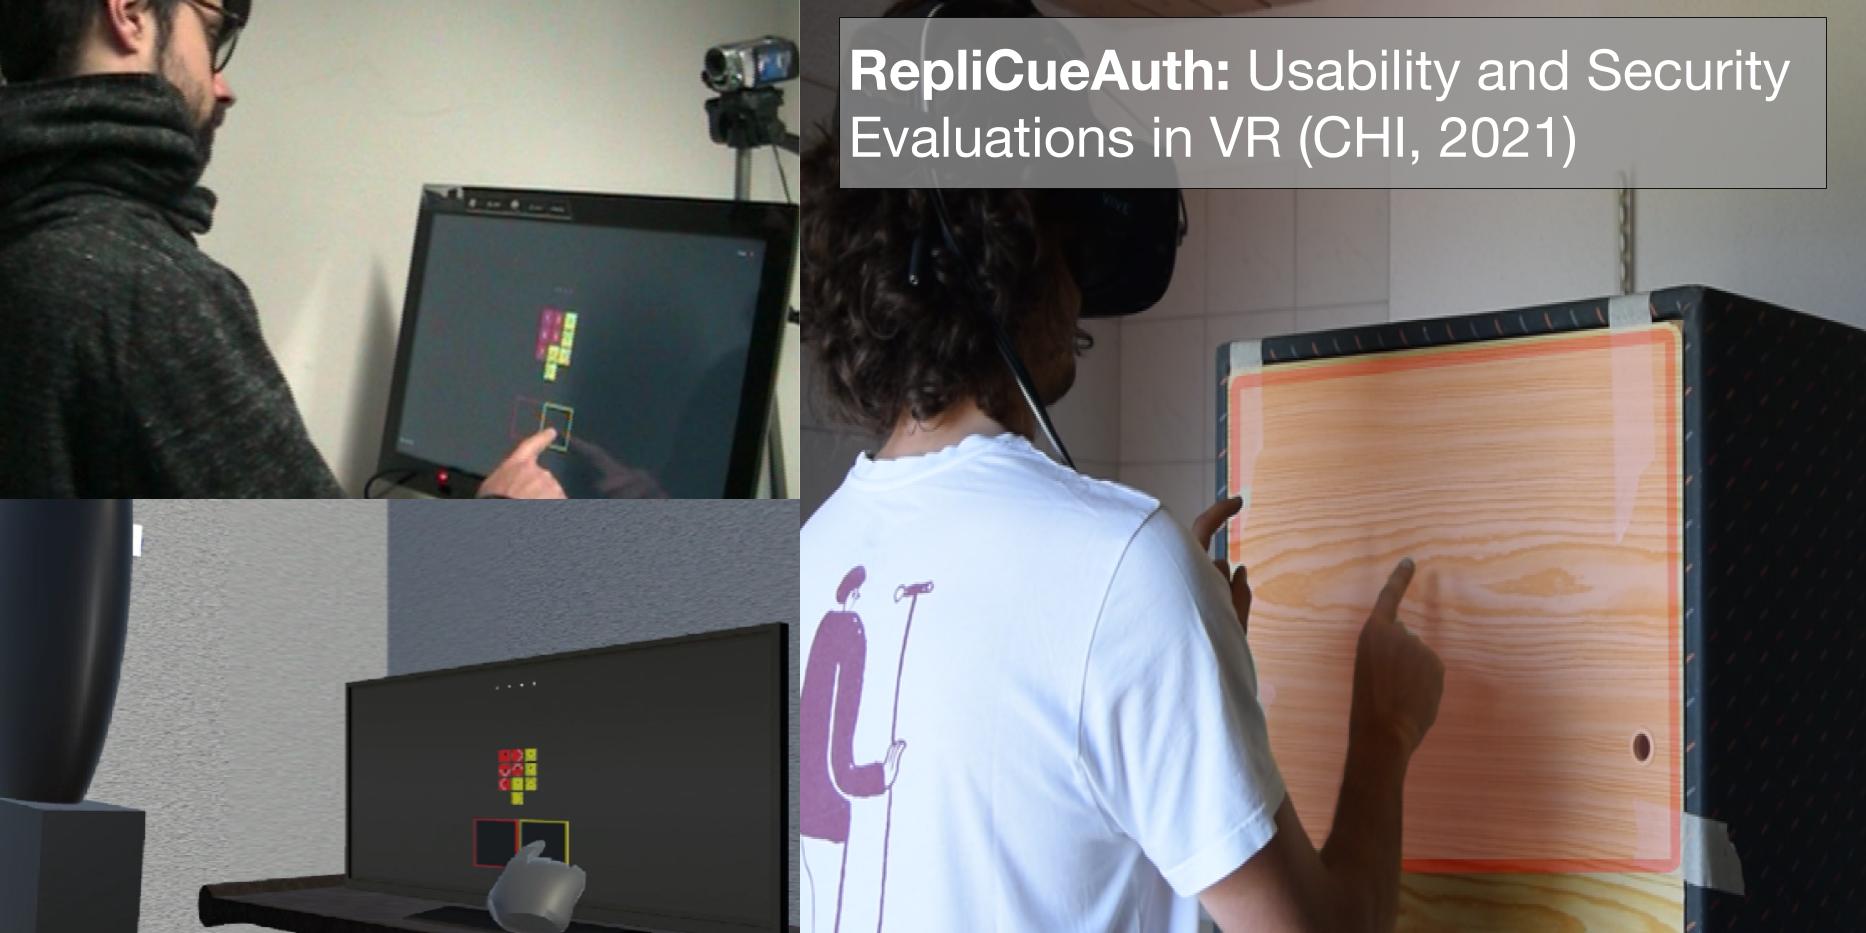 RepliCuAuth: Usability and Security Evaluations in VR